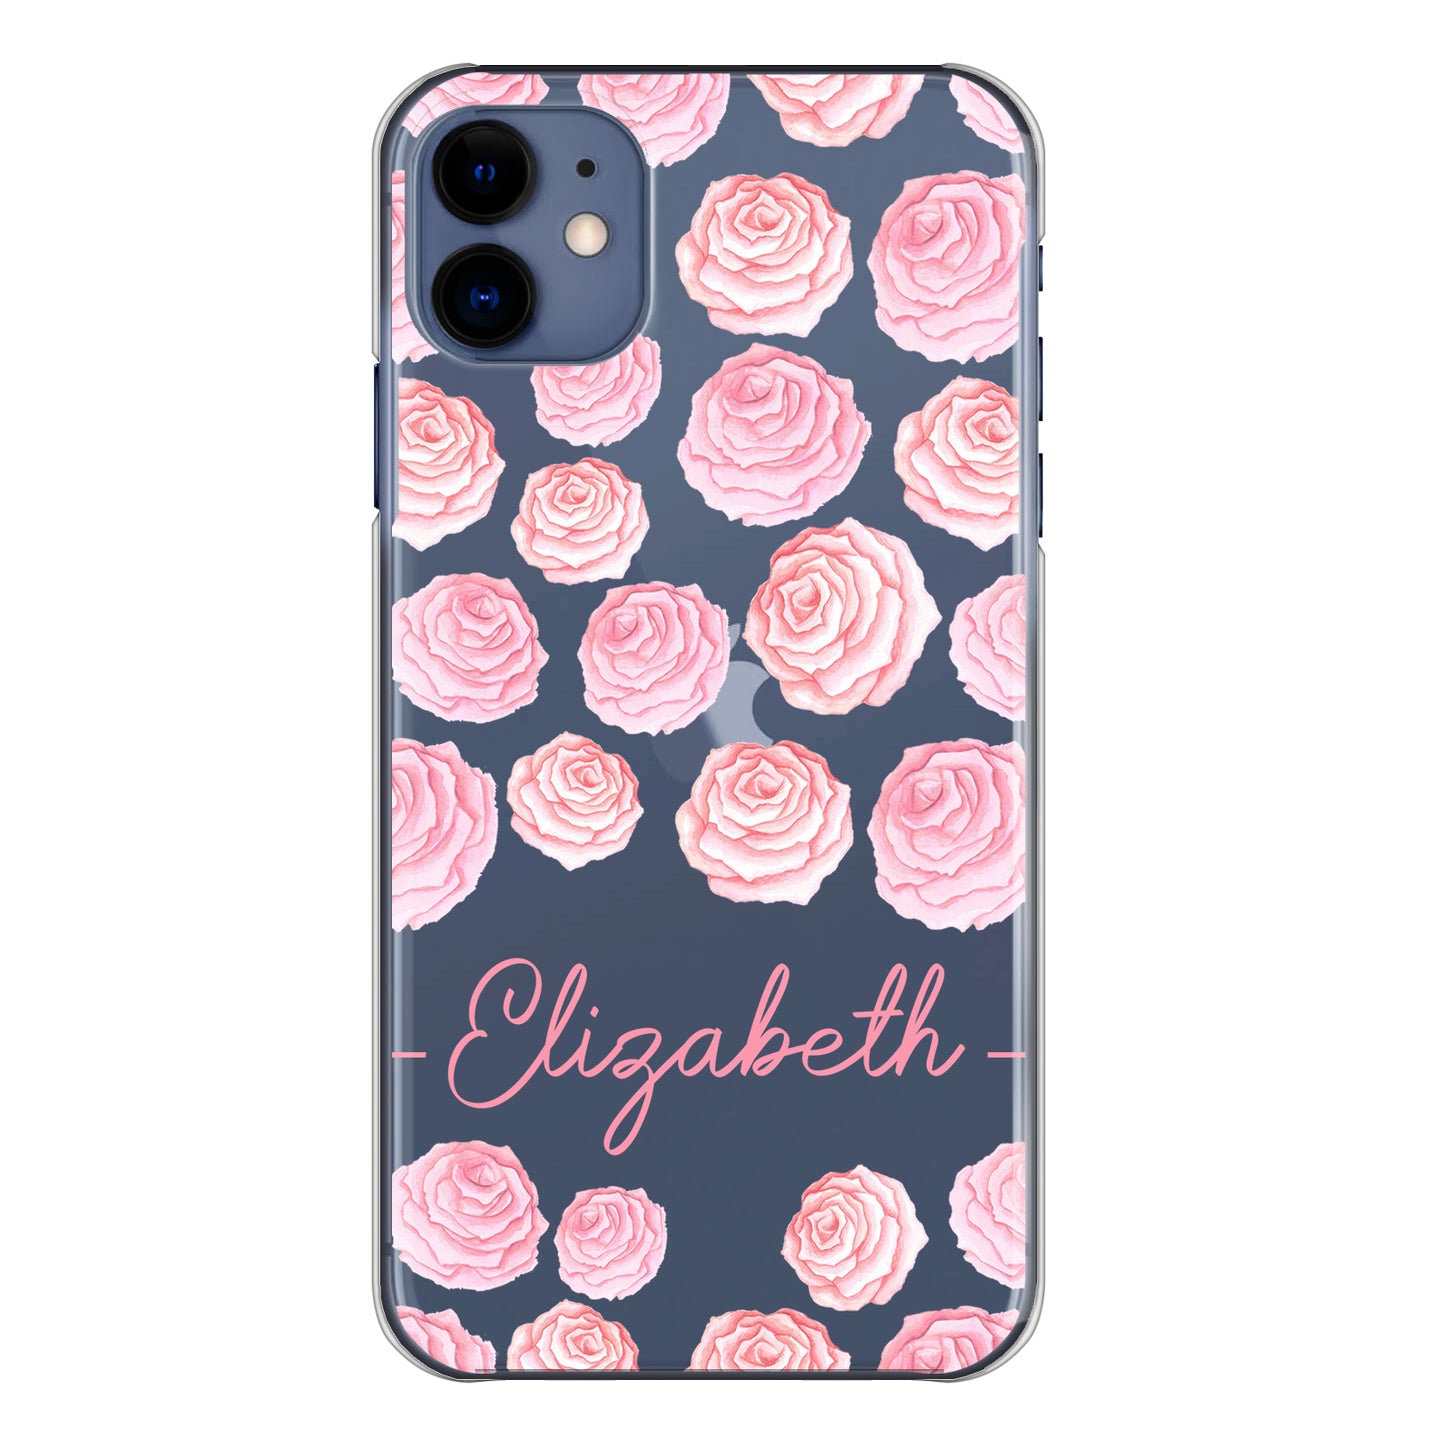 Personalised Nokia Phone Hard Case with Pink Roses and Elegant Pink Text